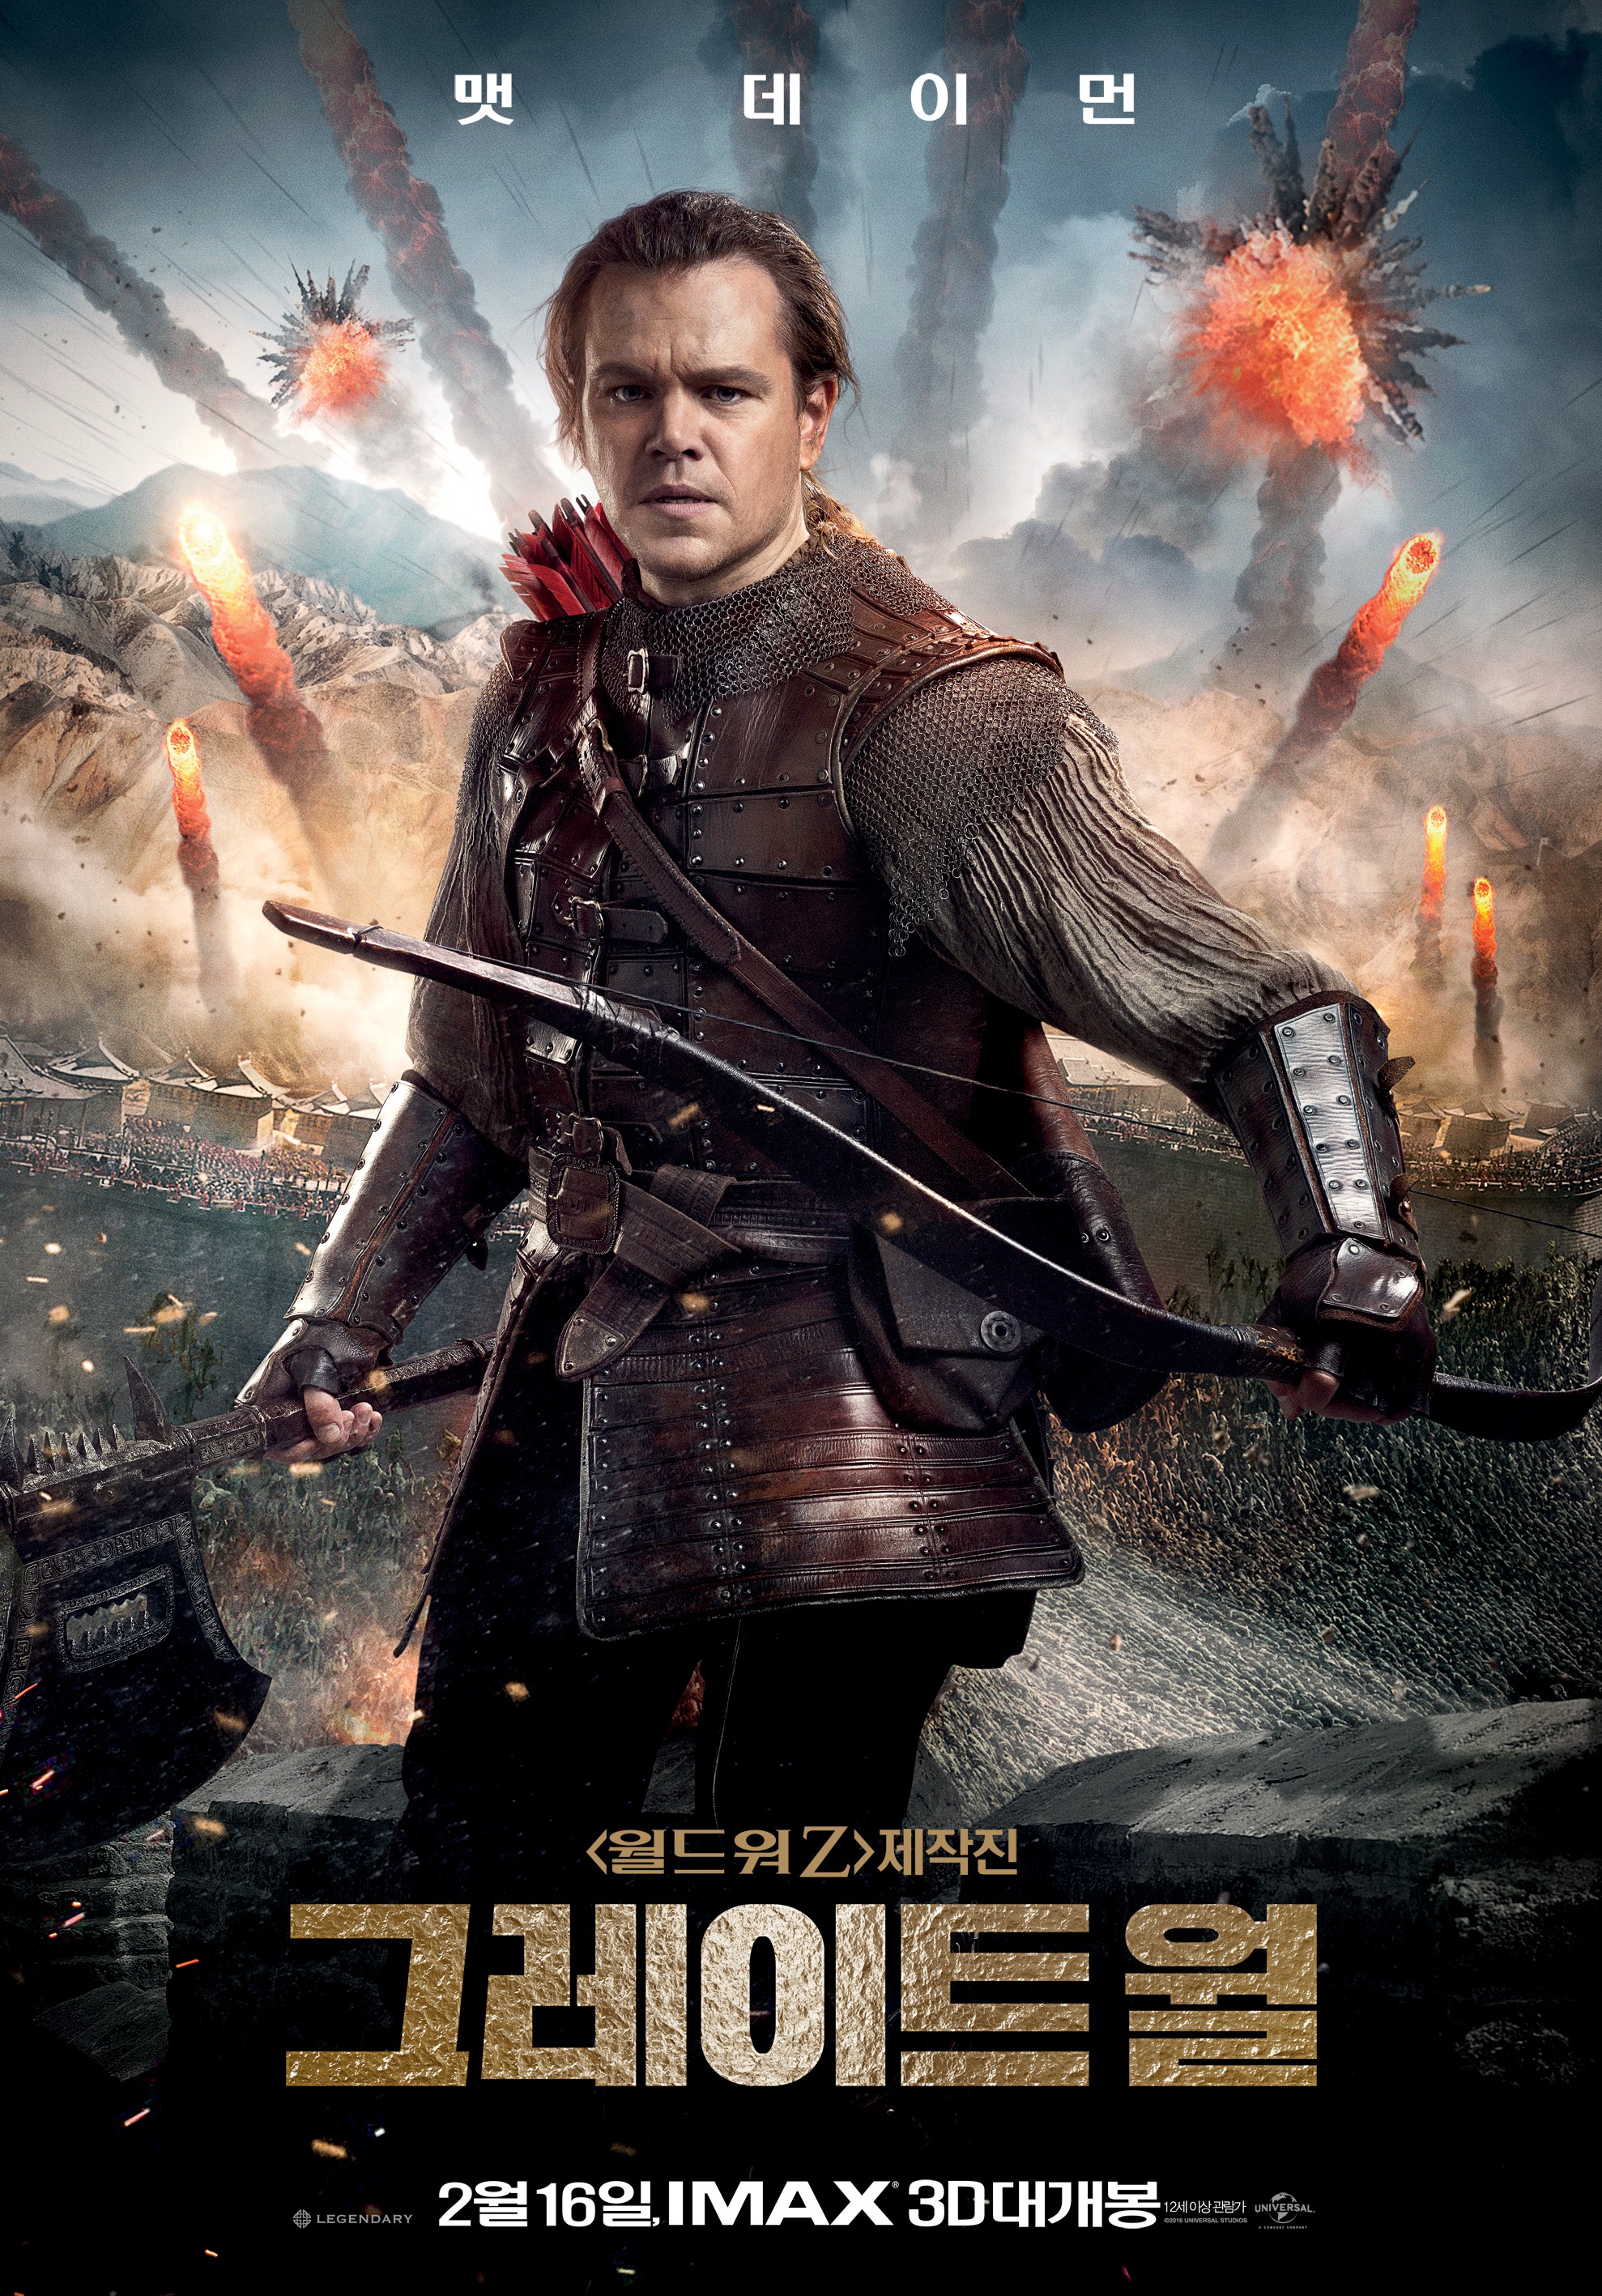 Mega Sized Movie Poster Image for The Great Wall (#18 of 21)